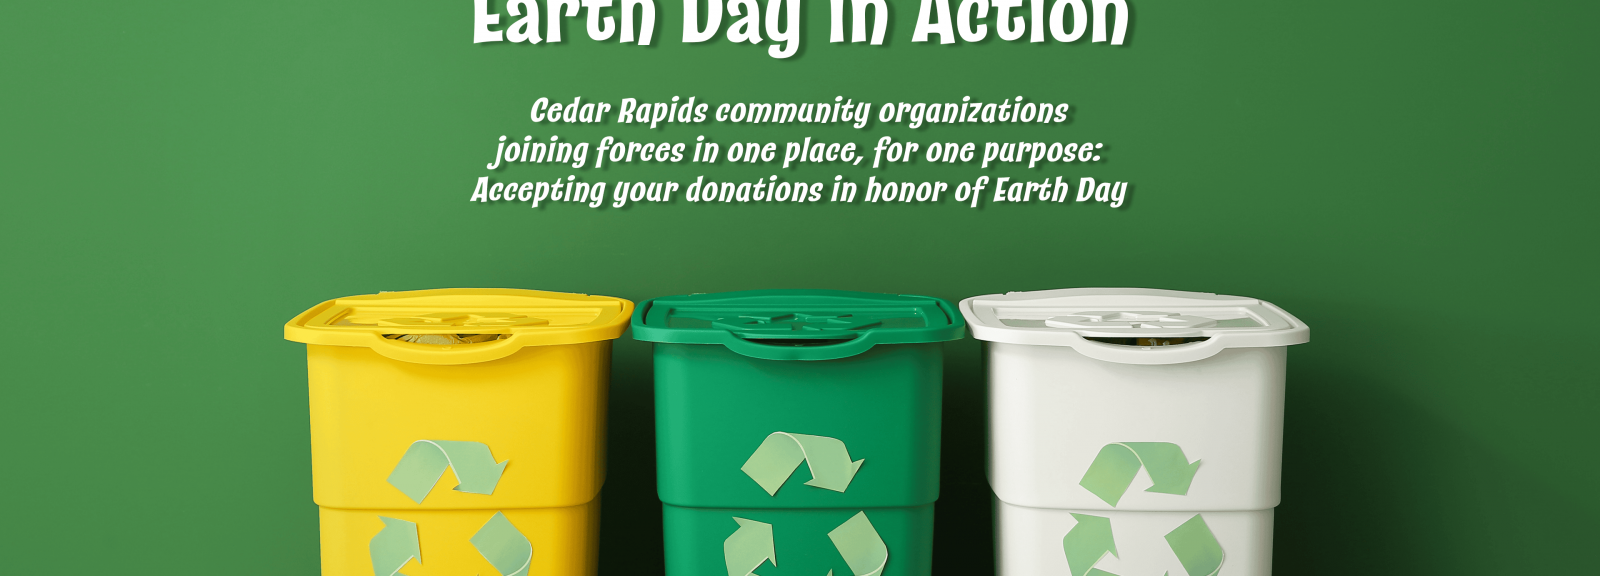 Earth Day in Action banner